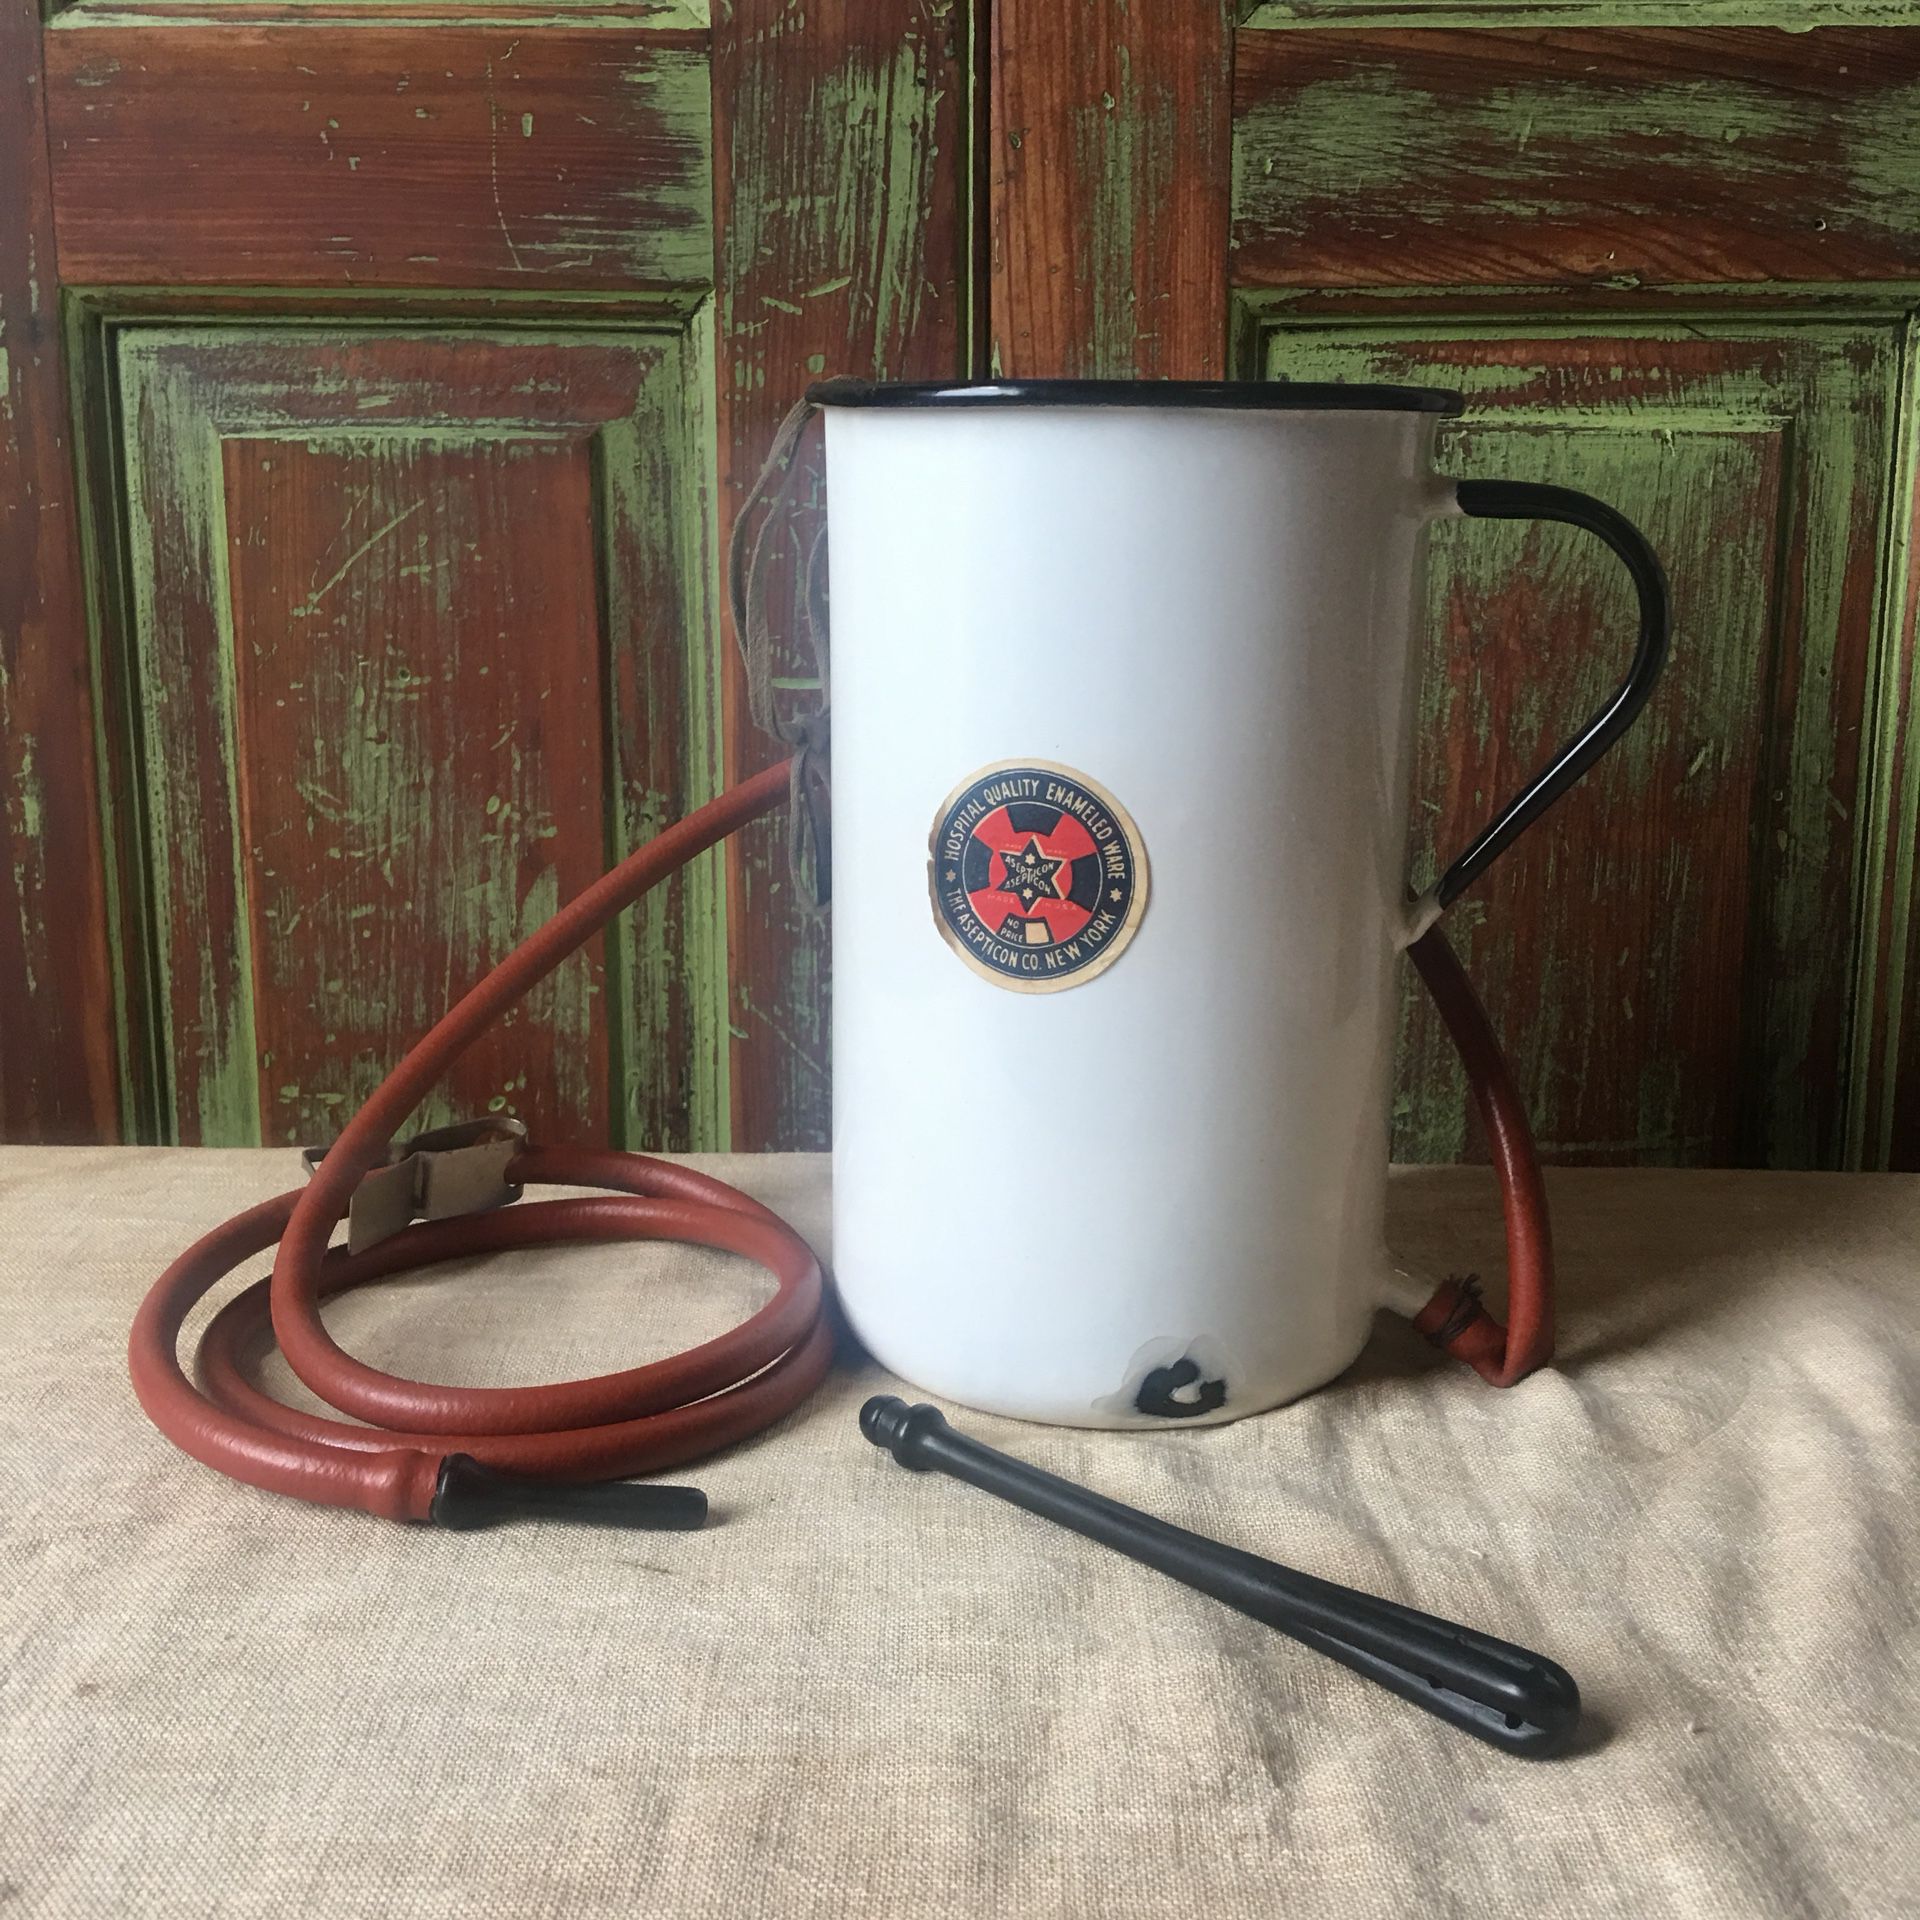 Download Vintage Enamelware Medical Irrigator With Hose And Pipes For Sale In Lancaster Pa Offerup